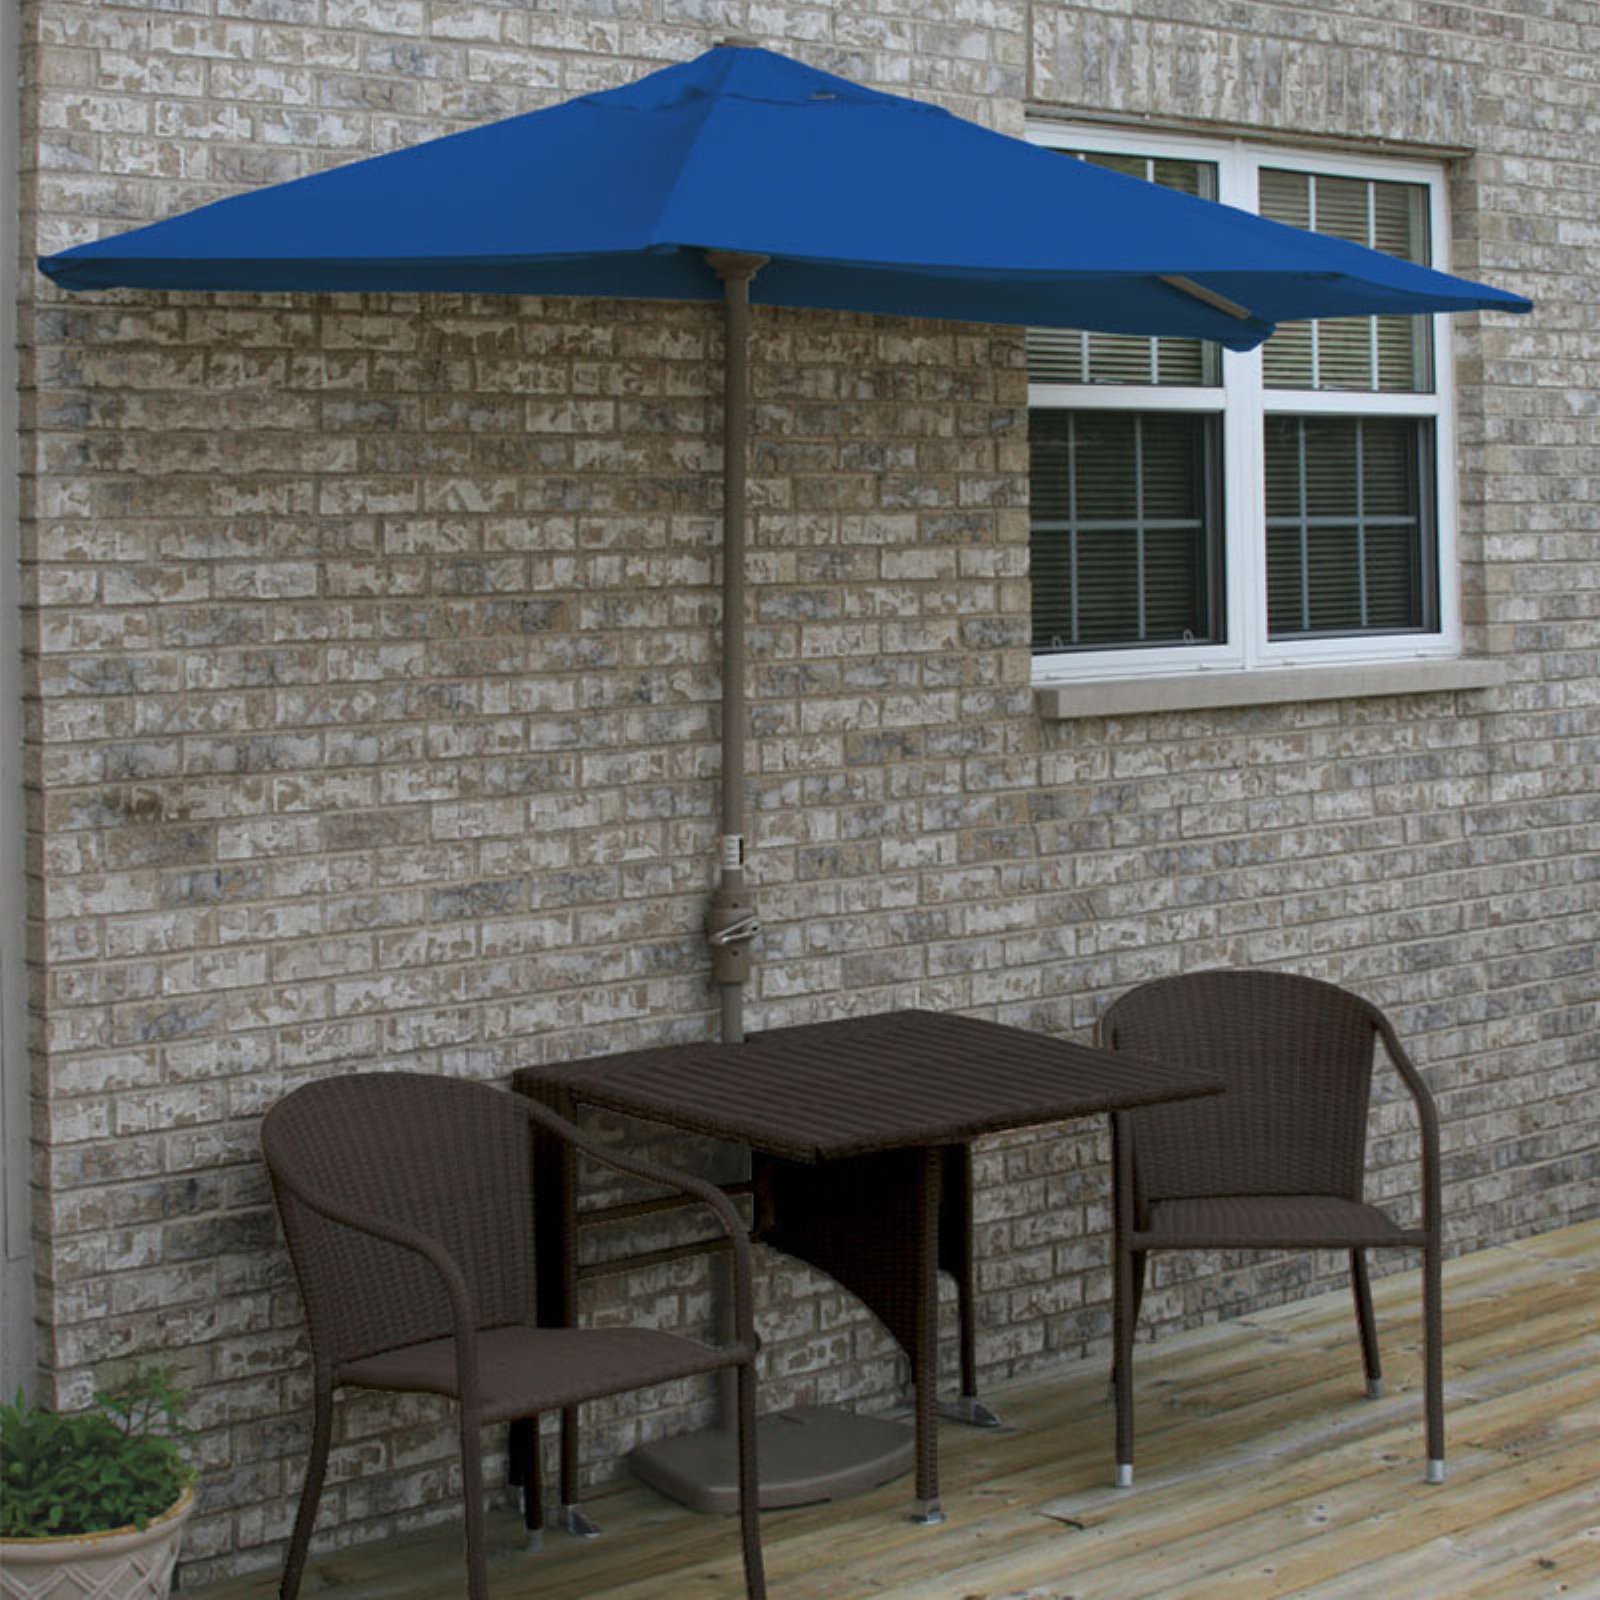 Blue Star Group Terrace Mates Daniella All-Weather Wicker Java Color Table Set w/ 9'-Wide OFF-THE-WALL BRELLA - Green Olefin Canopy - image 2 of 9